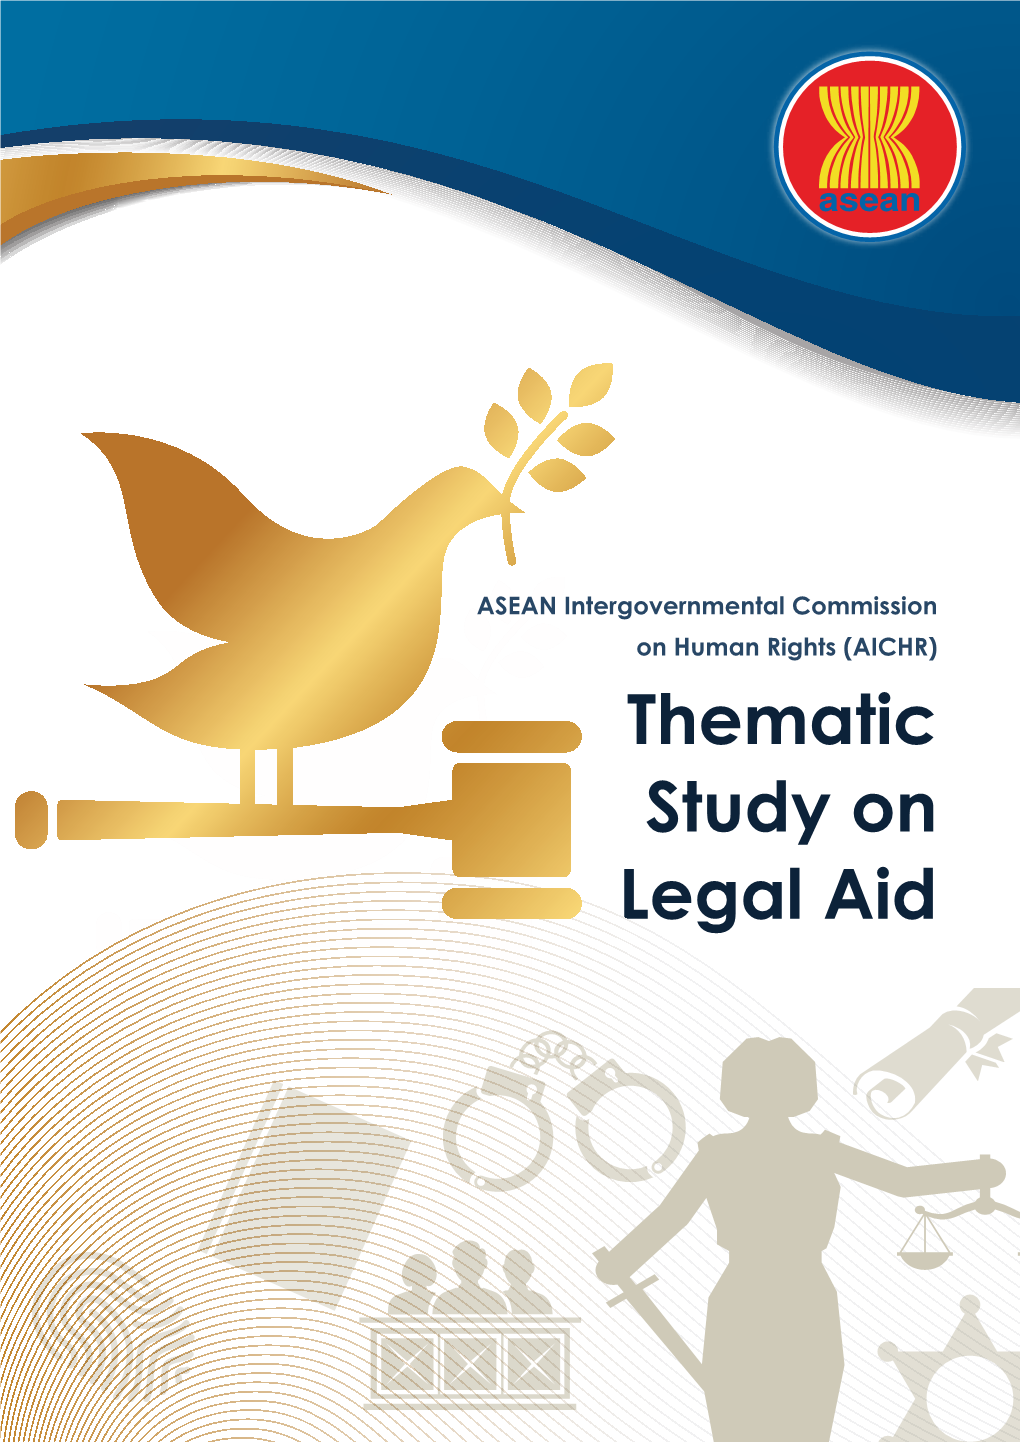 AICHR Thematic Study on Legal